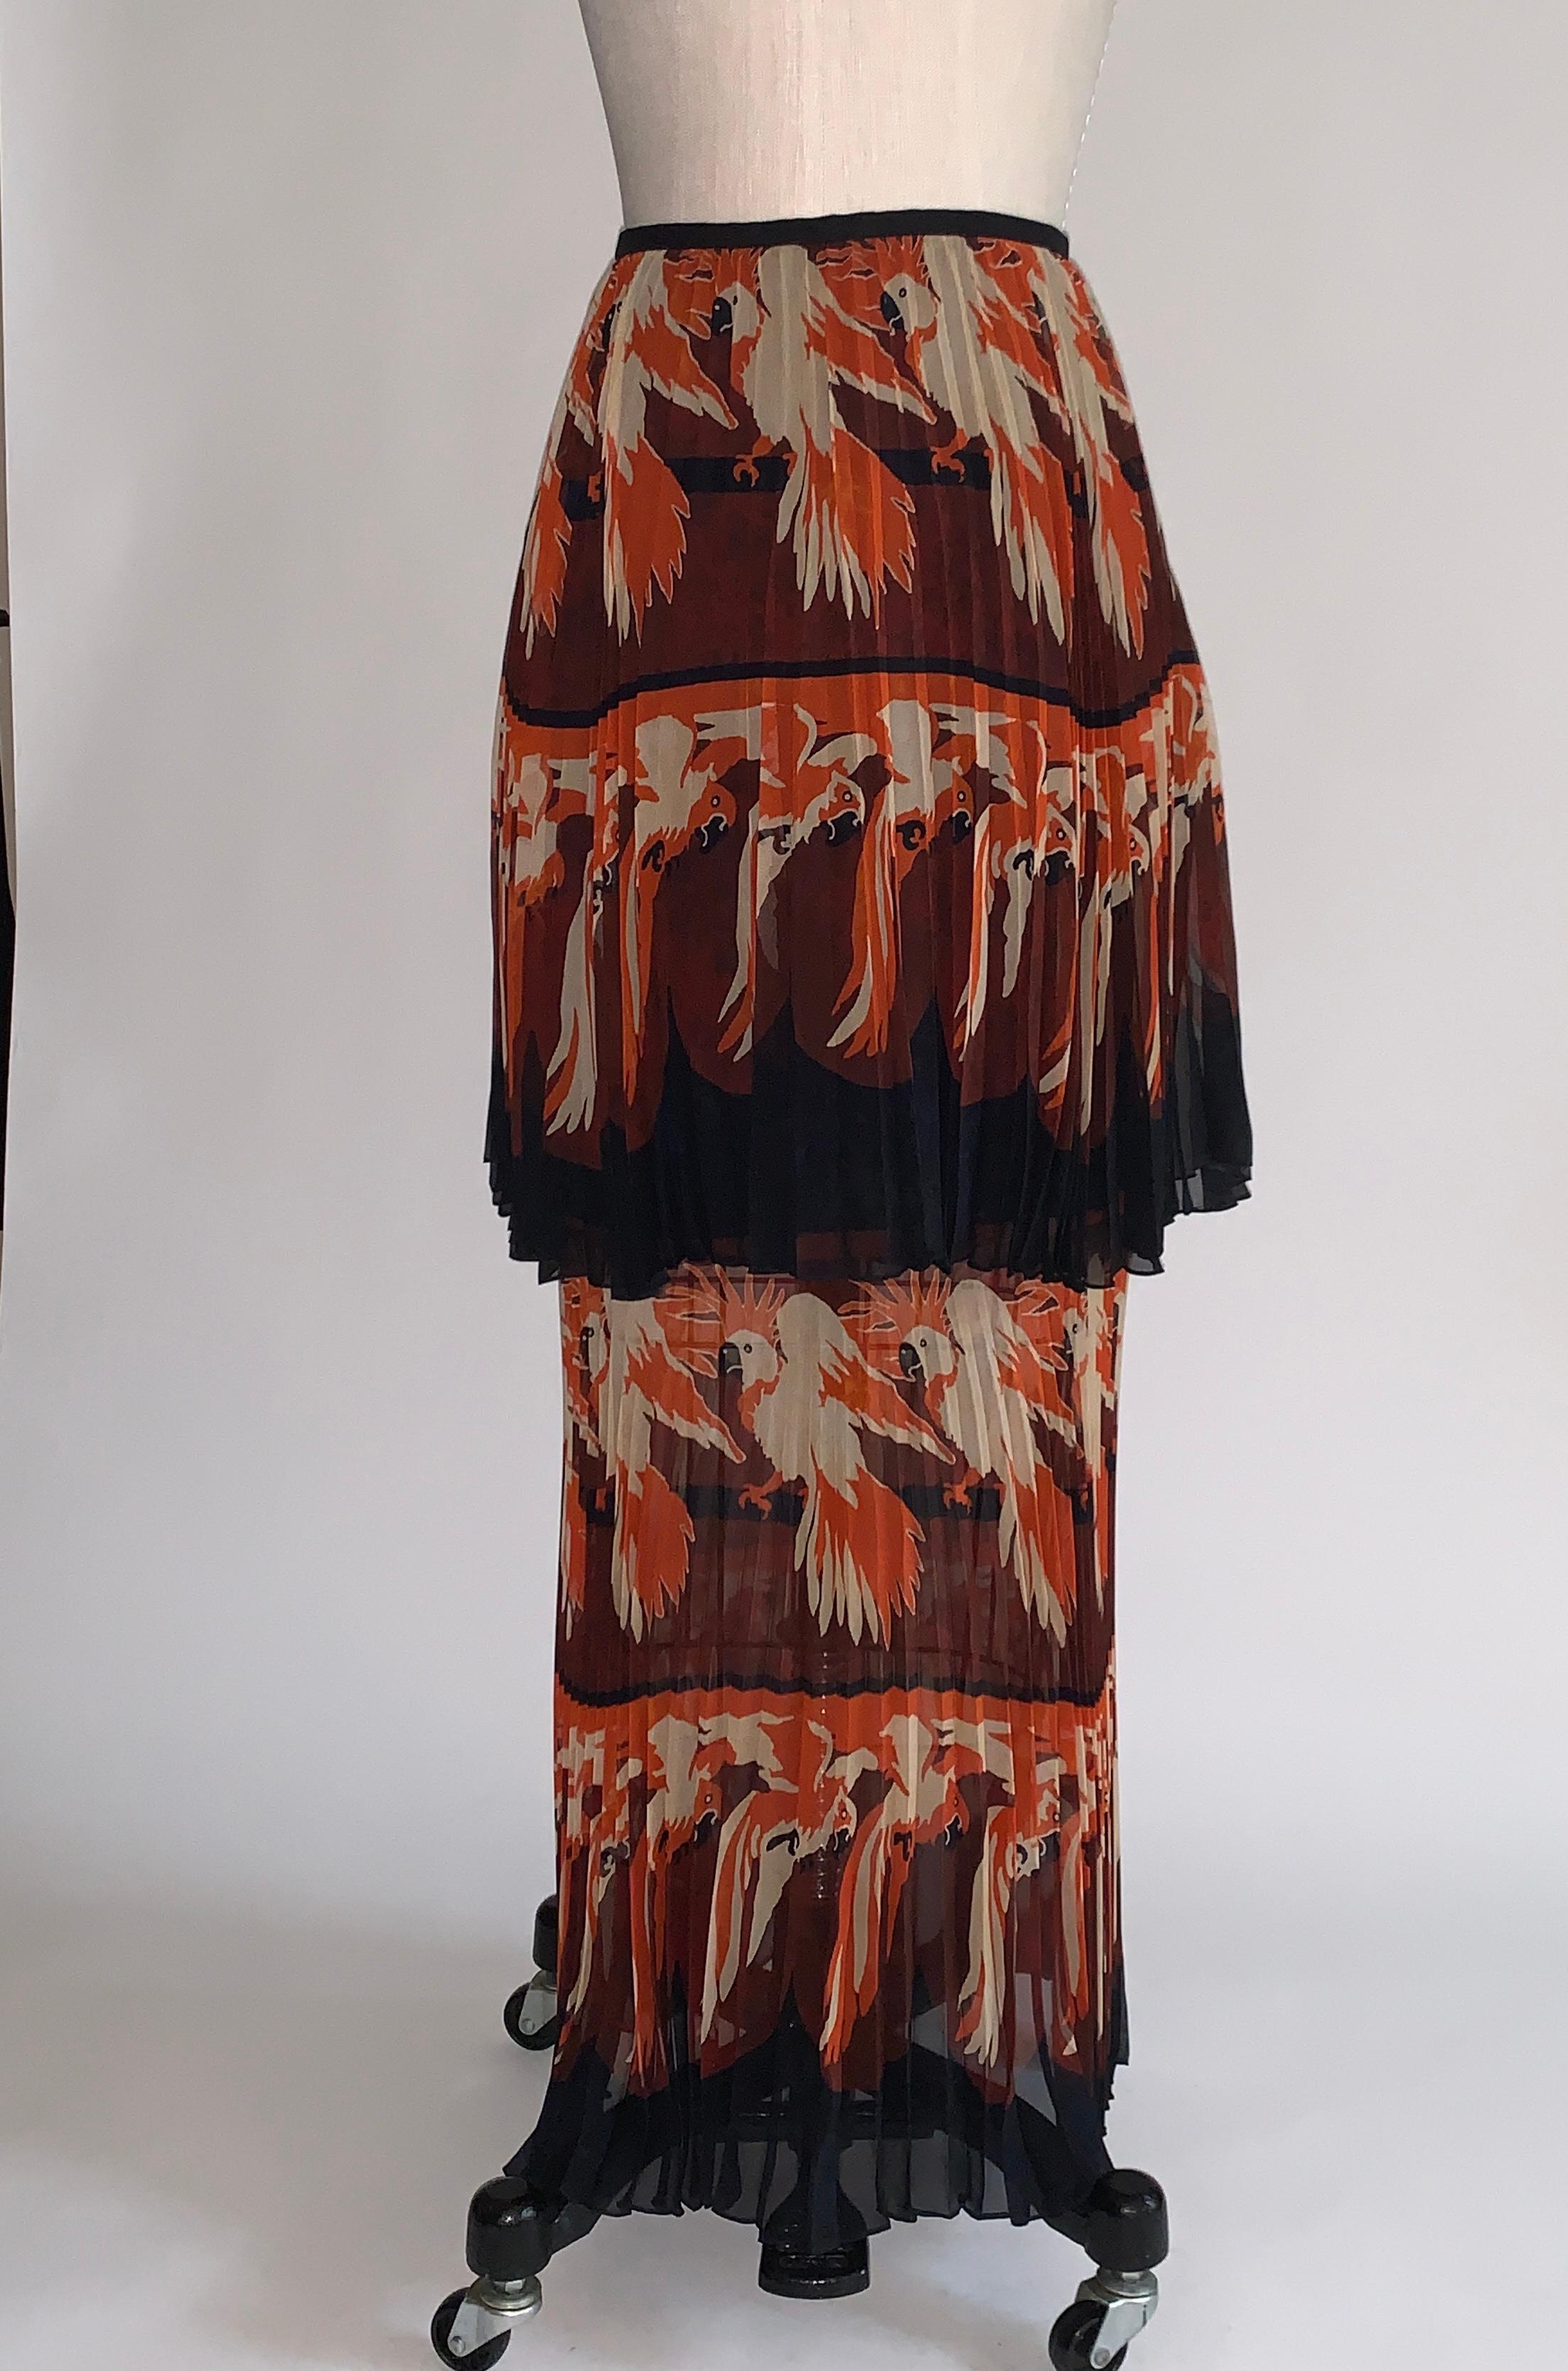 Fendi pleated layered long skirt with rows of orange and cream parakeets or parrots. One mid length layer floats atop a longer one. Side zip and hook. Lined to mid-length.

100% silk.

Made in Italy.

Size IT 40, approximate US 4.
Waist 27